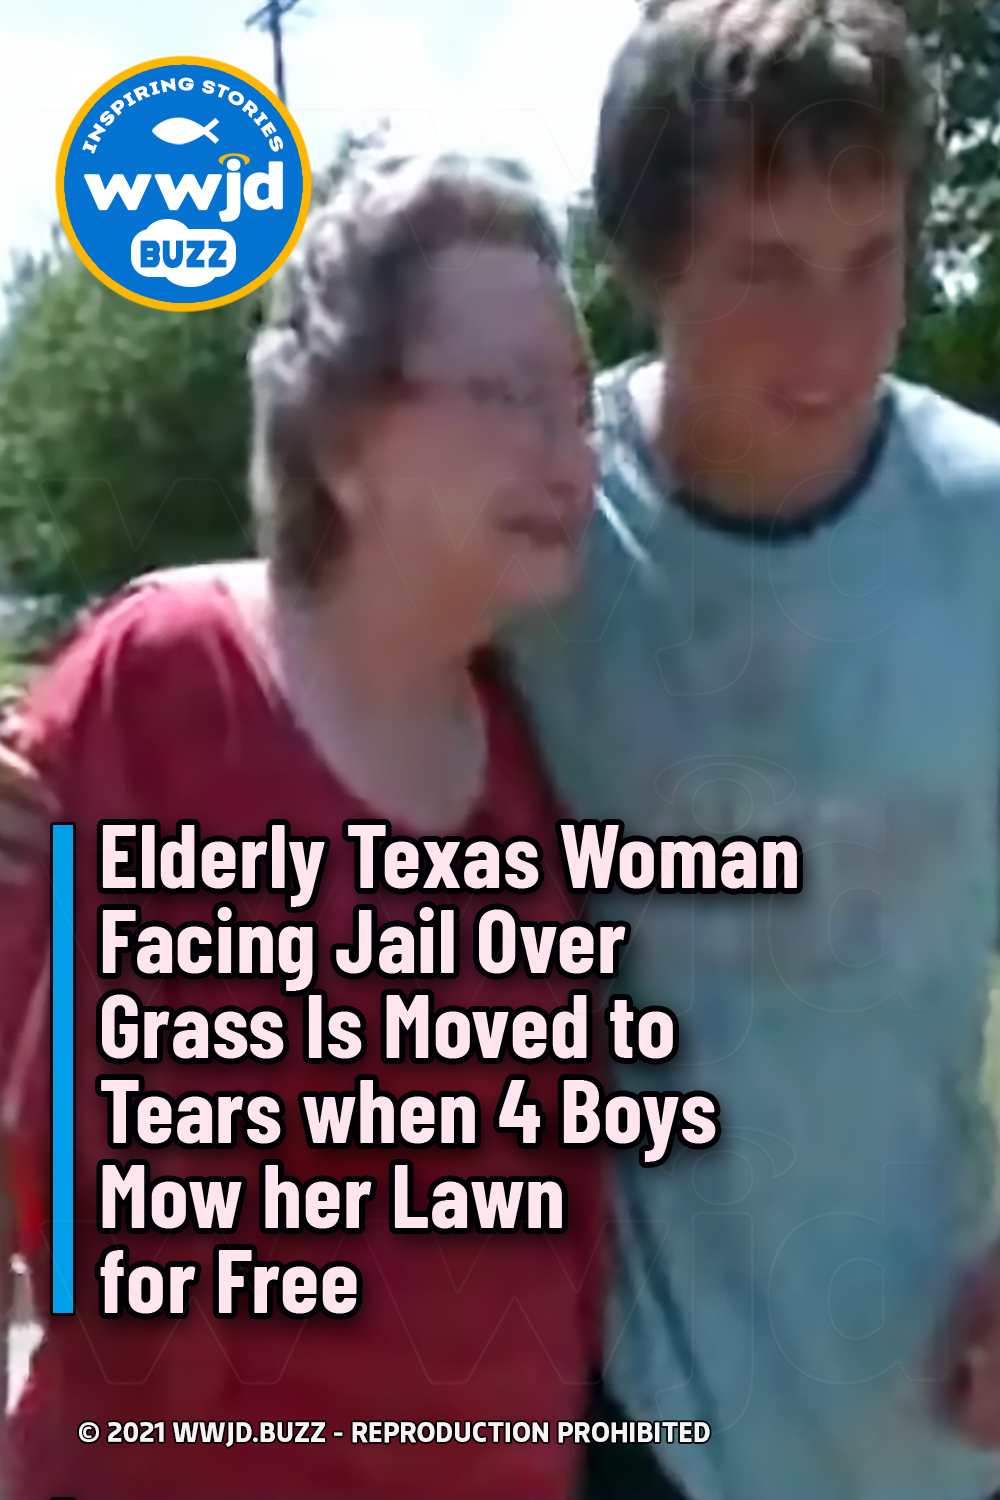 Elderly Texas Woman Facing Jail Over Grass Is Moved to Tears when 4 Boys Mow her Lawn for Free